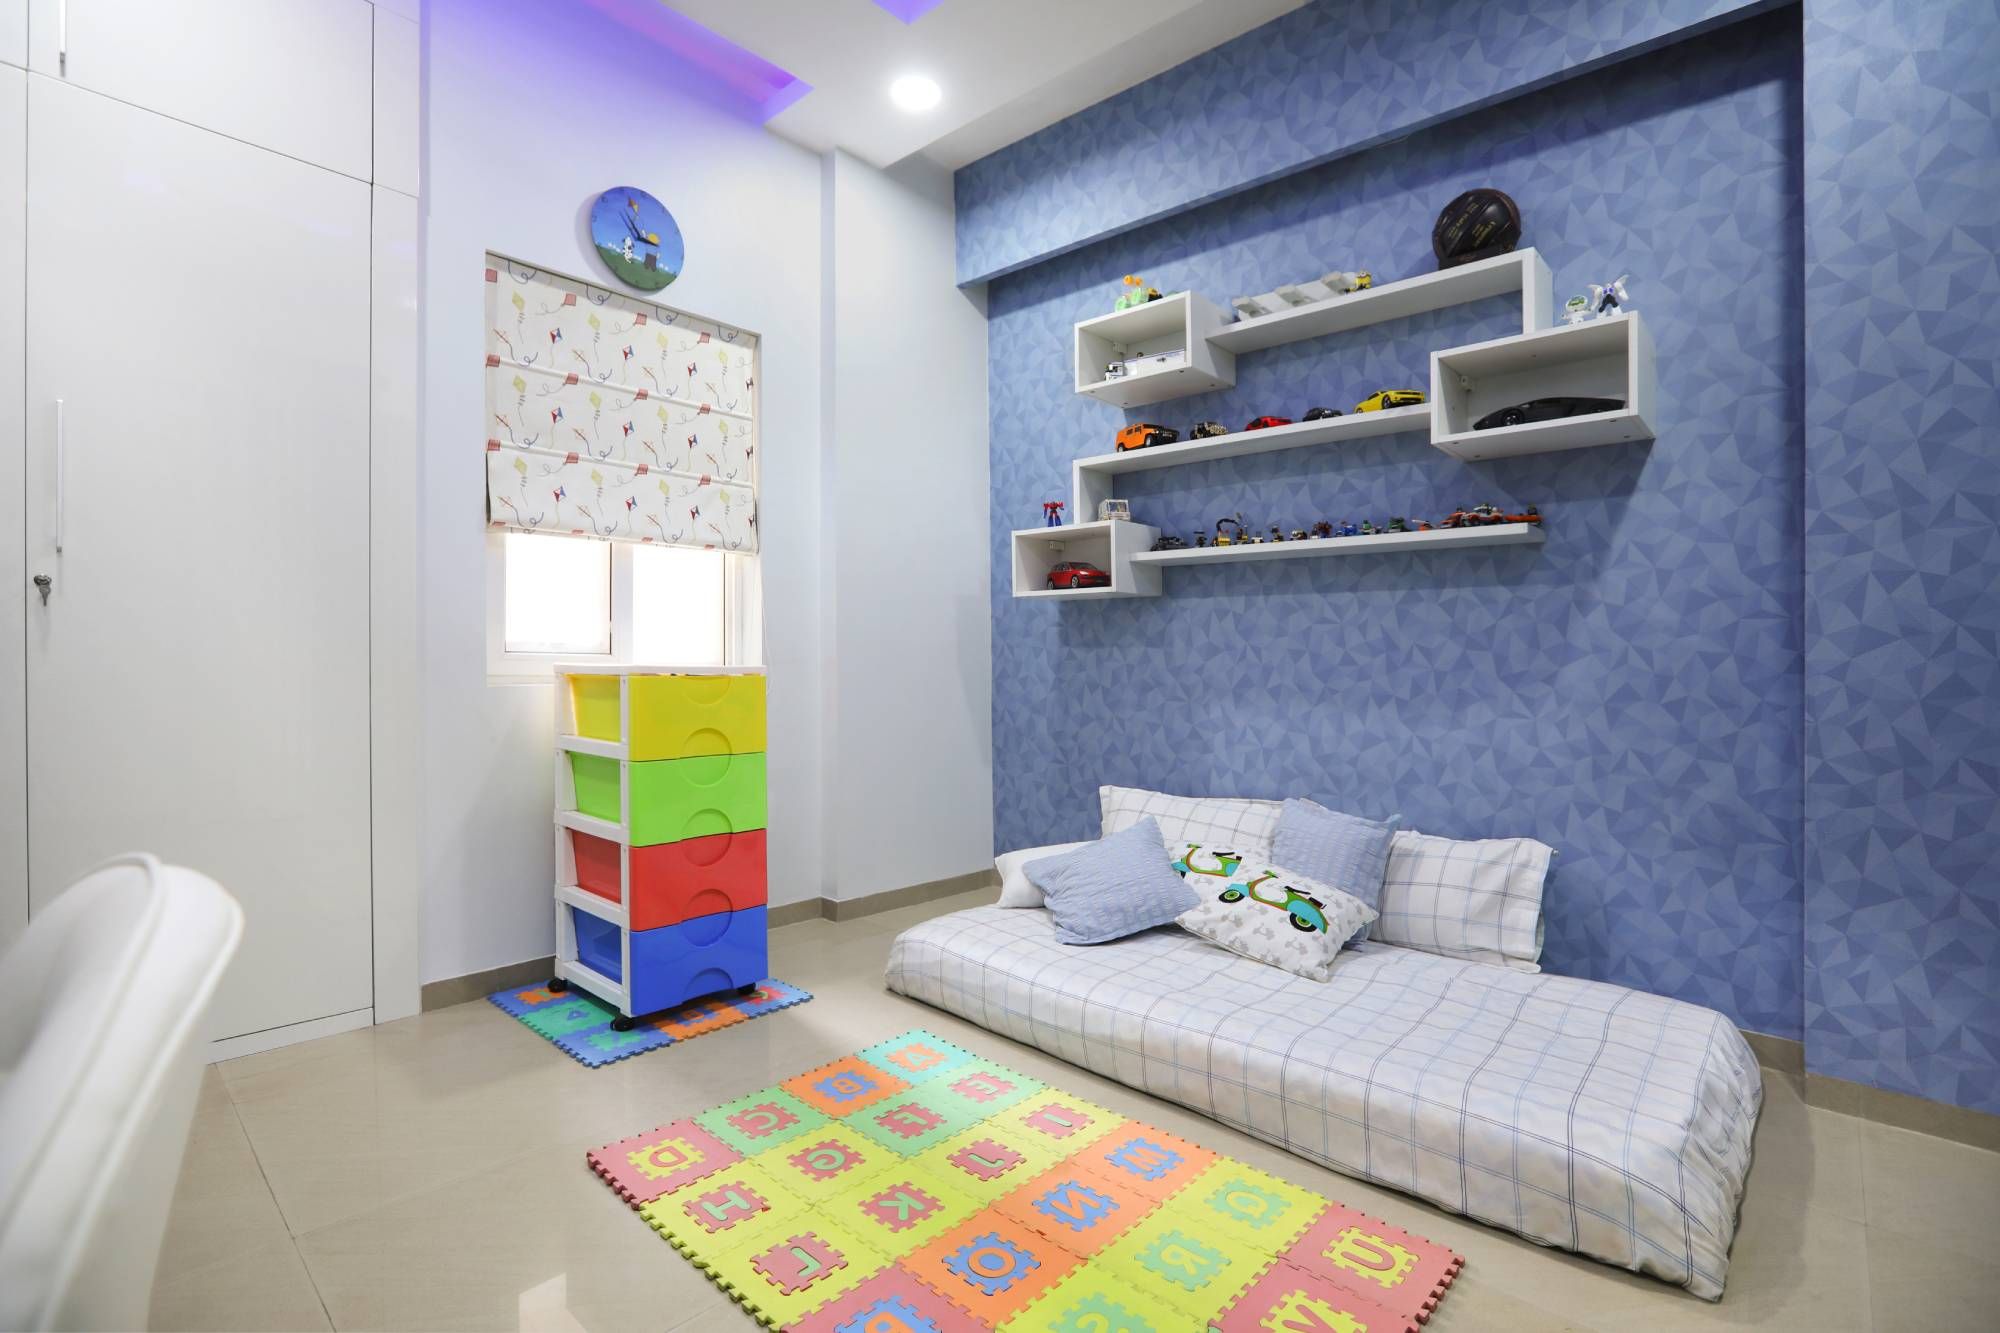 Modern Kid's Room Design With Textured Wall Paint And Colourful Interiors